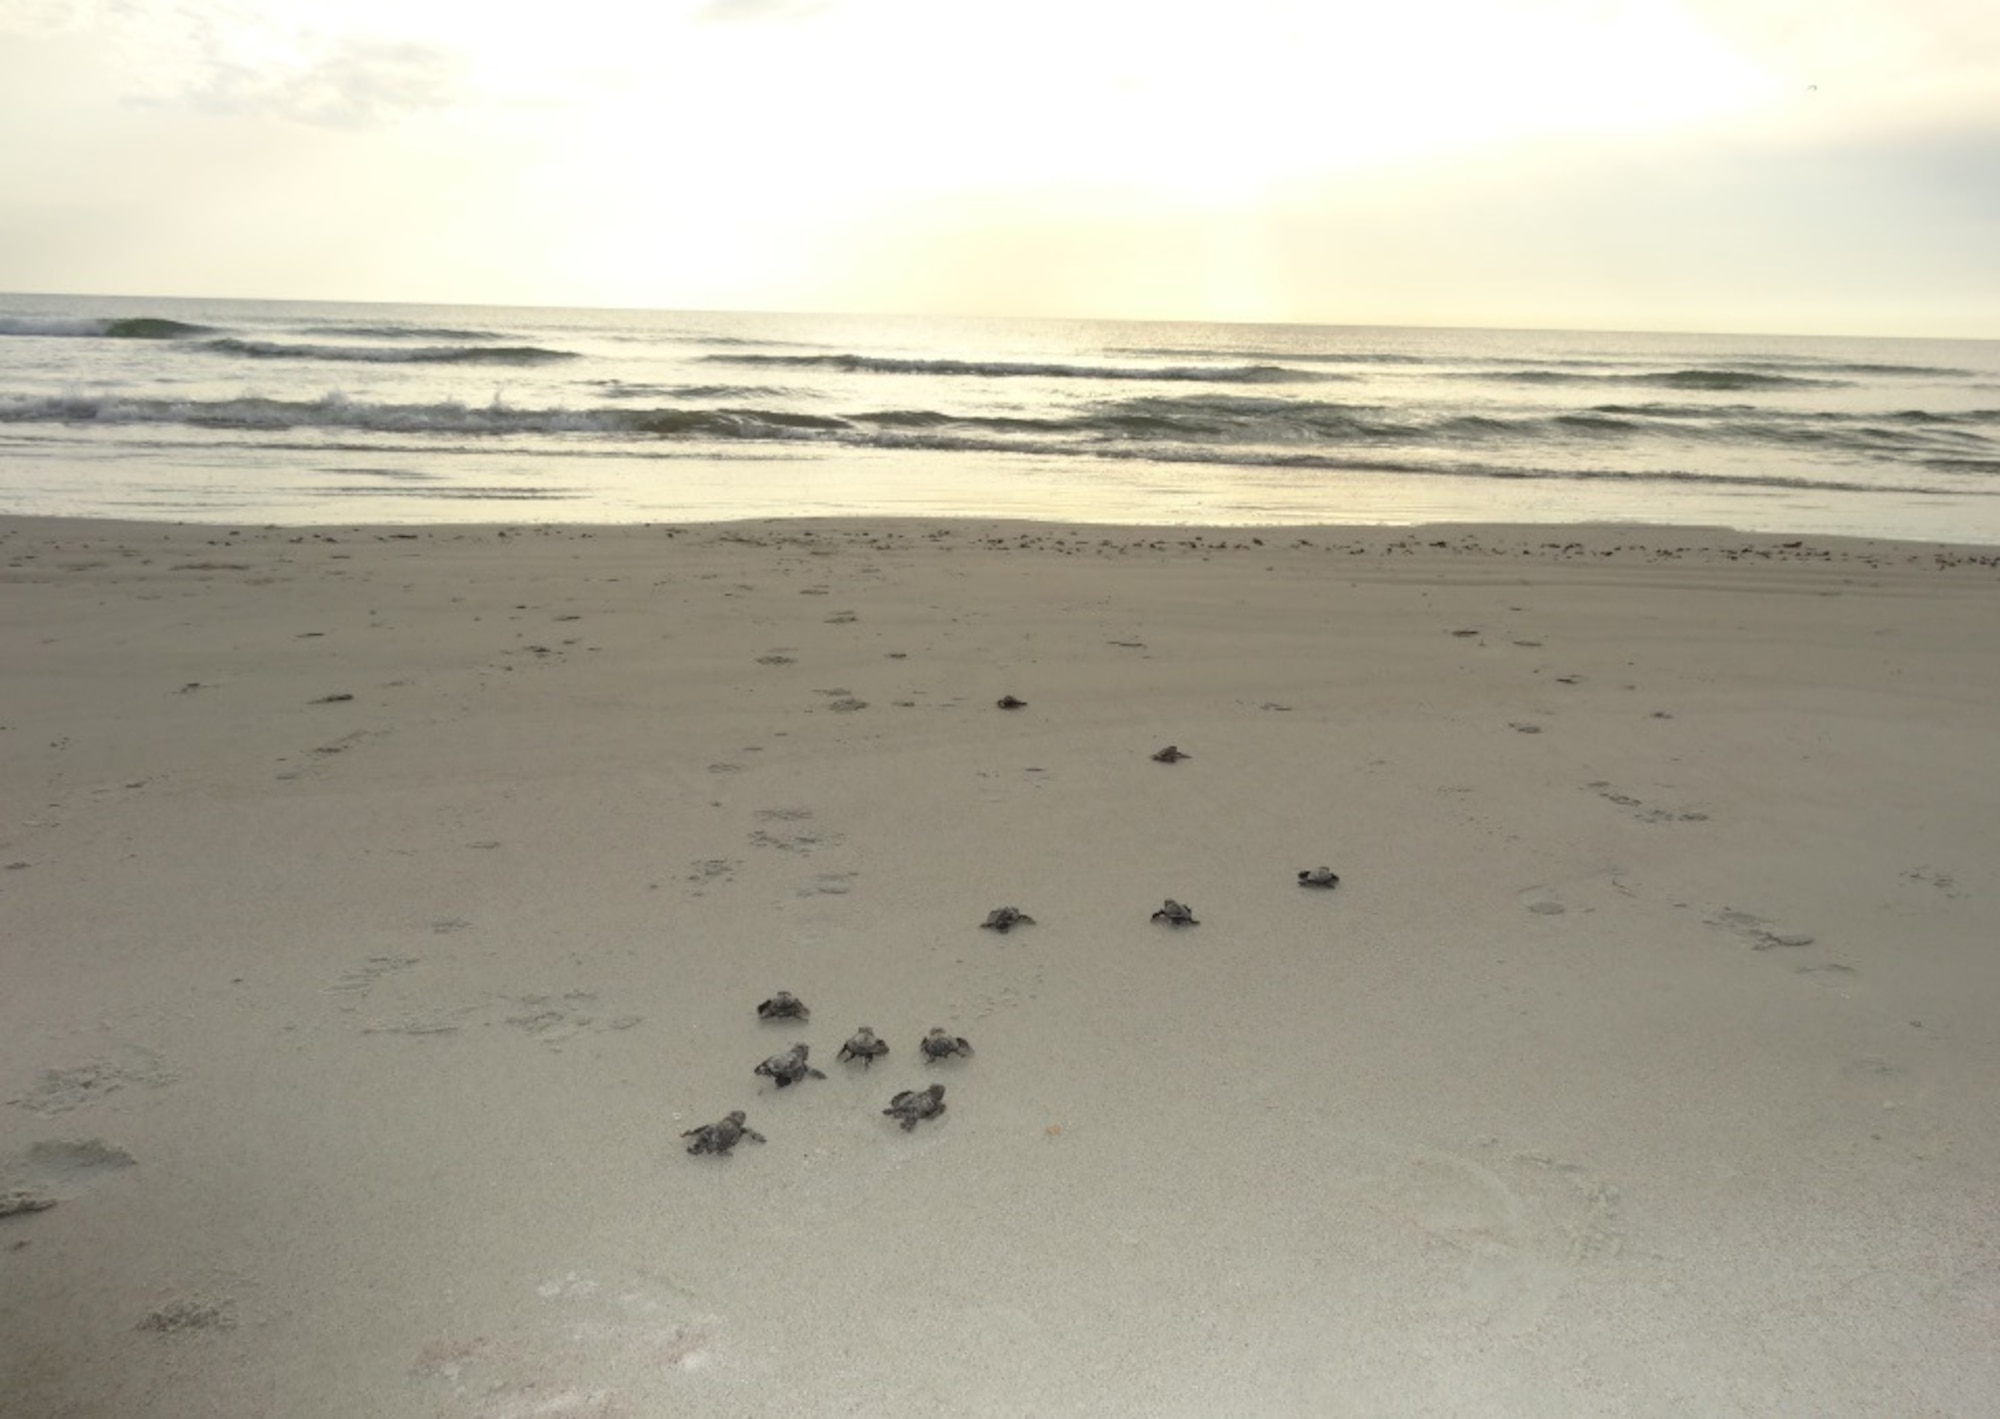 Kemp’s ridley hatchlings make their way to the Atlantic Ocean off of Cape Canaveral Air Force Station, Fla., July 11, 2015. The Kemp’s ridley is the rarest and most endangered sea turtle in the world. It was discovered nesting on the beaches of the Cape for the first time recorded May 14, 2015, and then again May 28, 2015. (Courtesy photo/Released) 